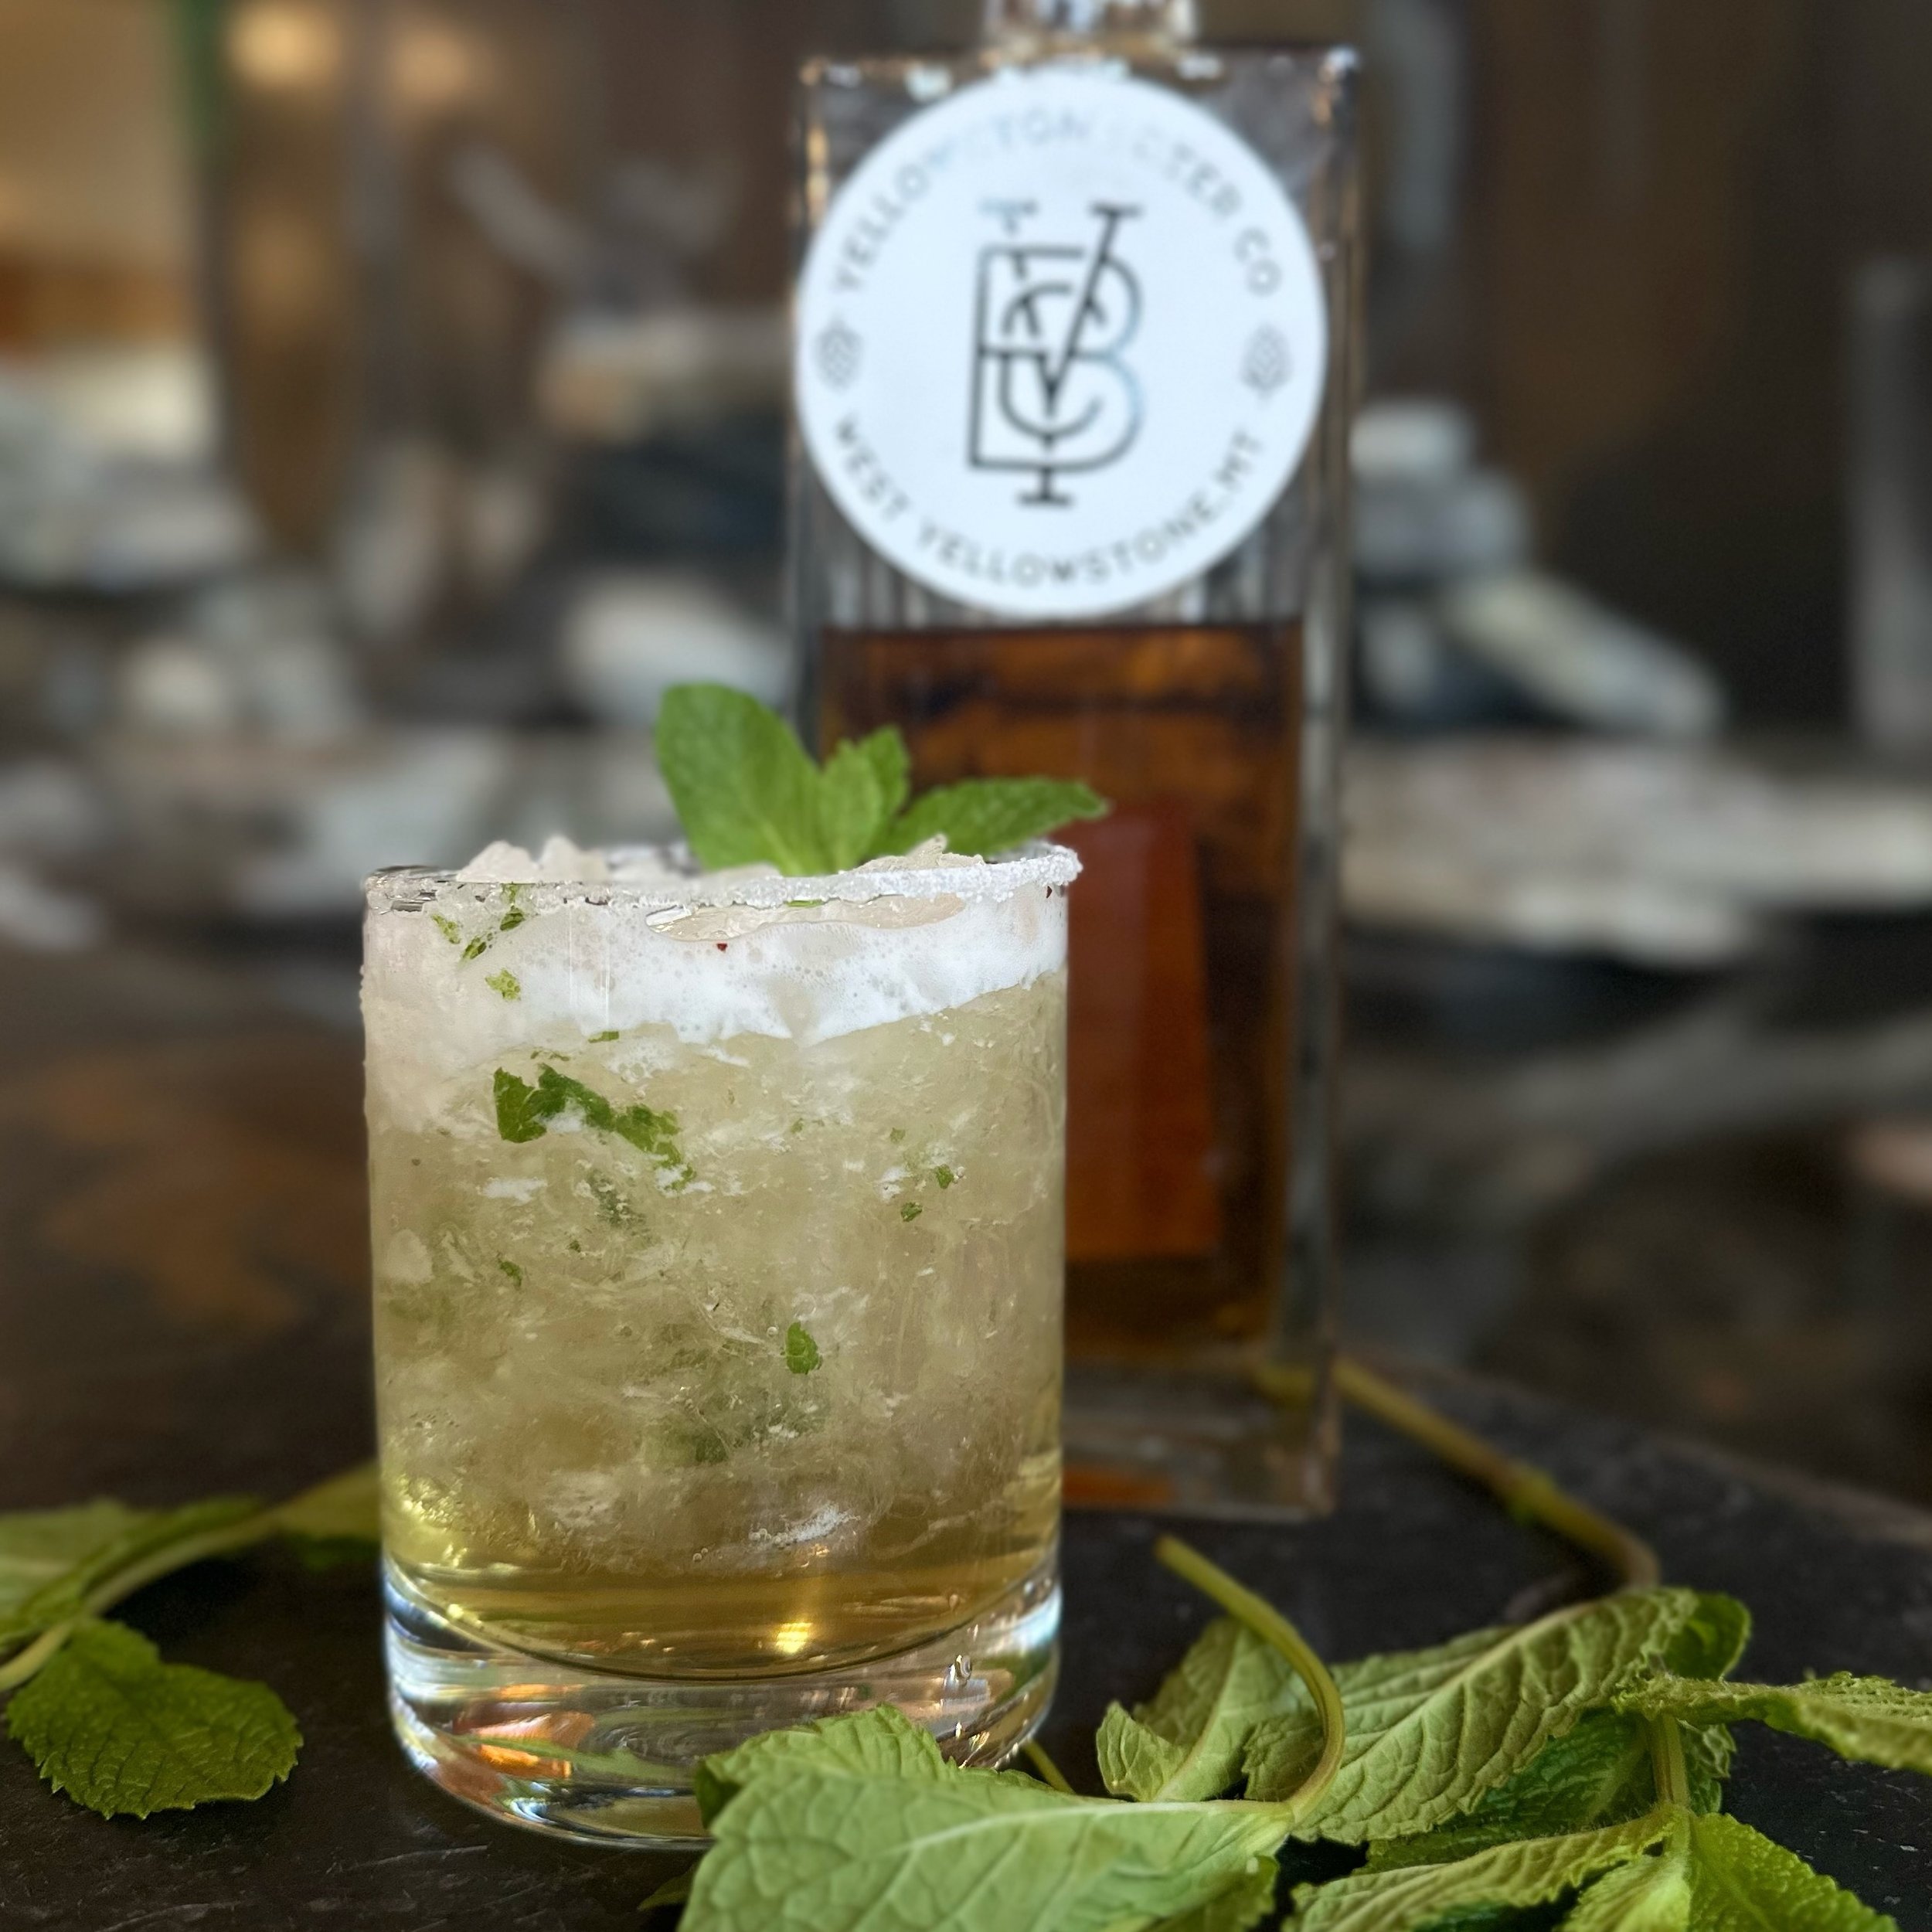 It&rsquo;s Derby Day! Come try our house-infused mint bourbon Mint Juleps today and watch the Kentucky Derby with us. 🏇